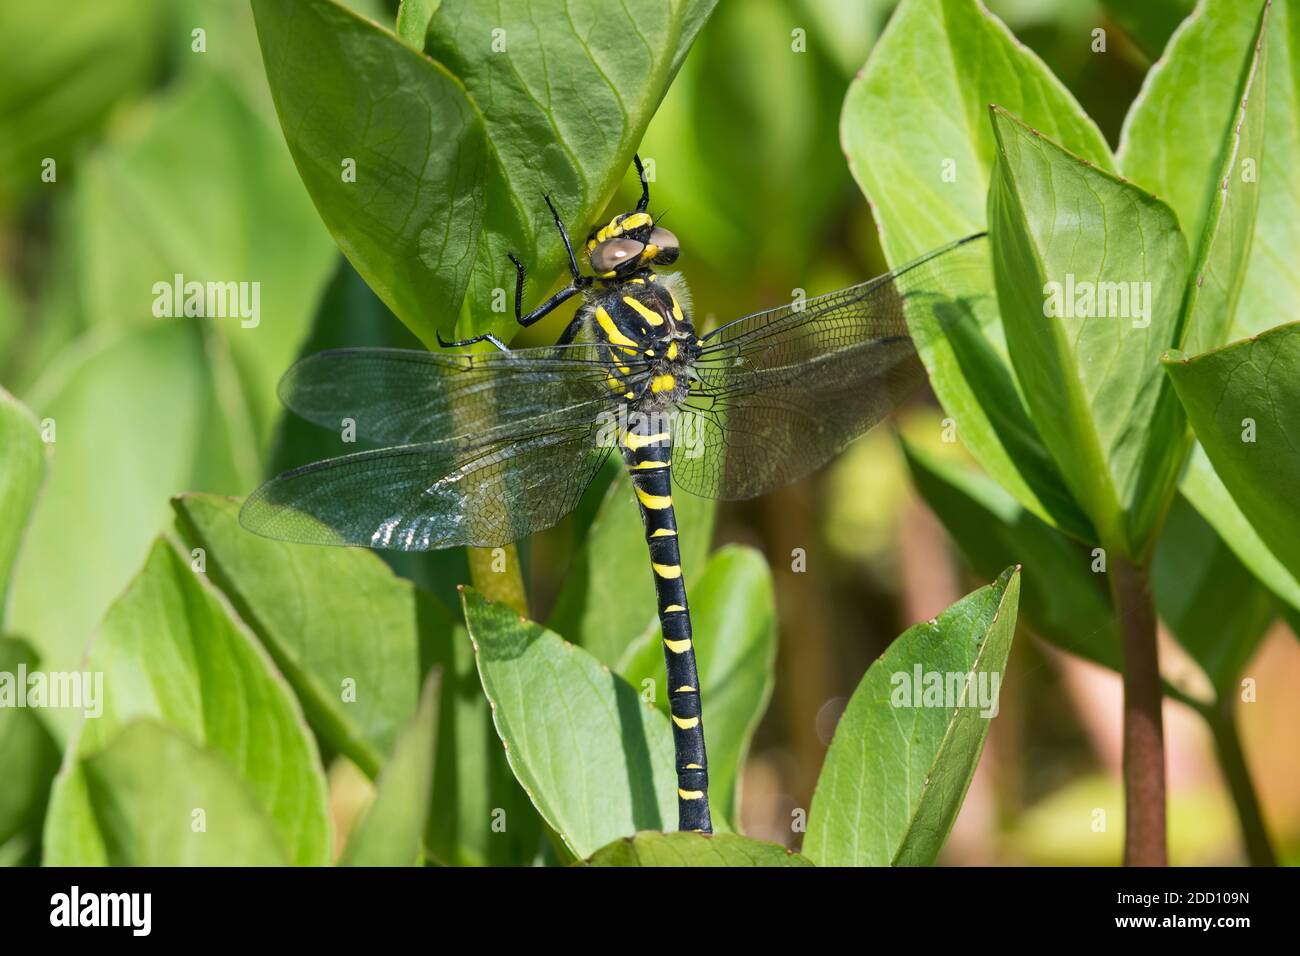 Golden-ringed Dragonfly, Cordulegaster boltonii, on Bogbean plants in a pond, Dumfries & Galloway, Scotland Stock Photo